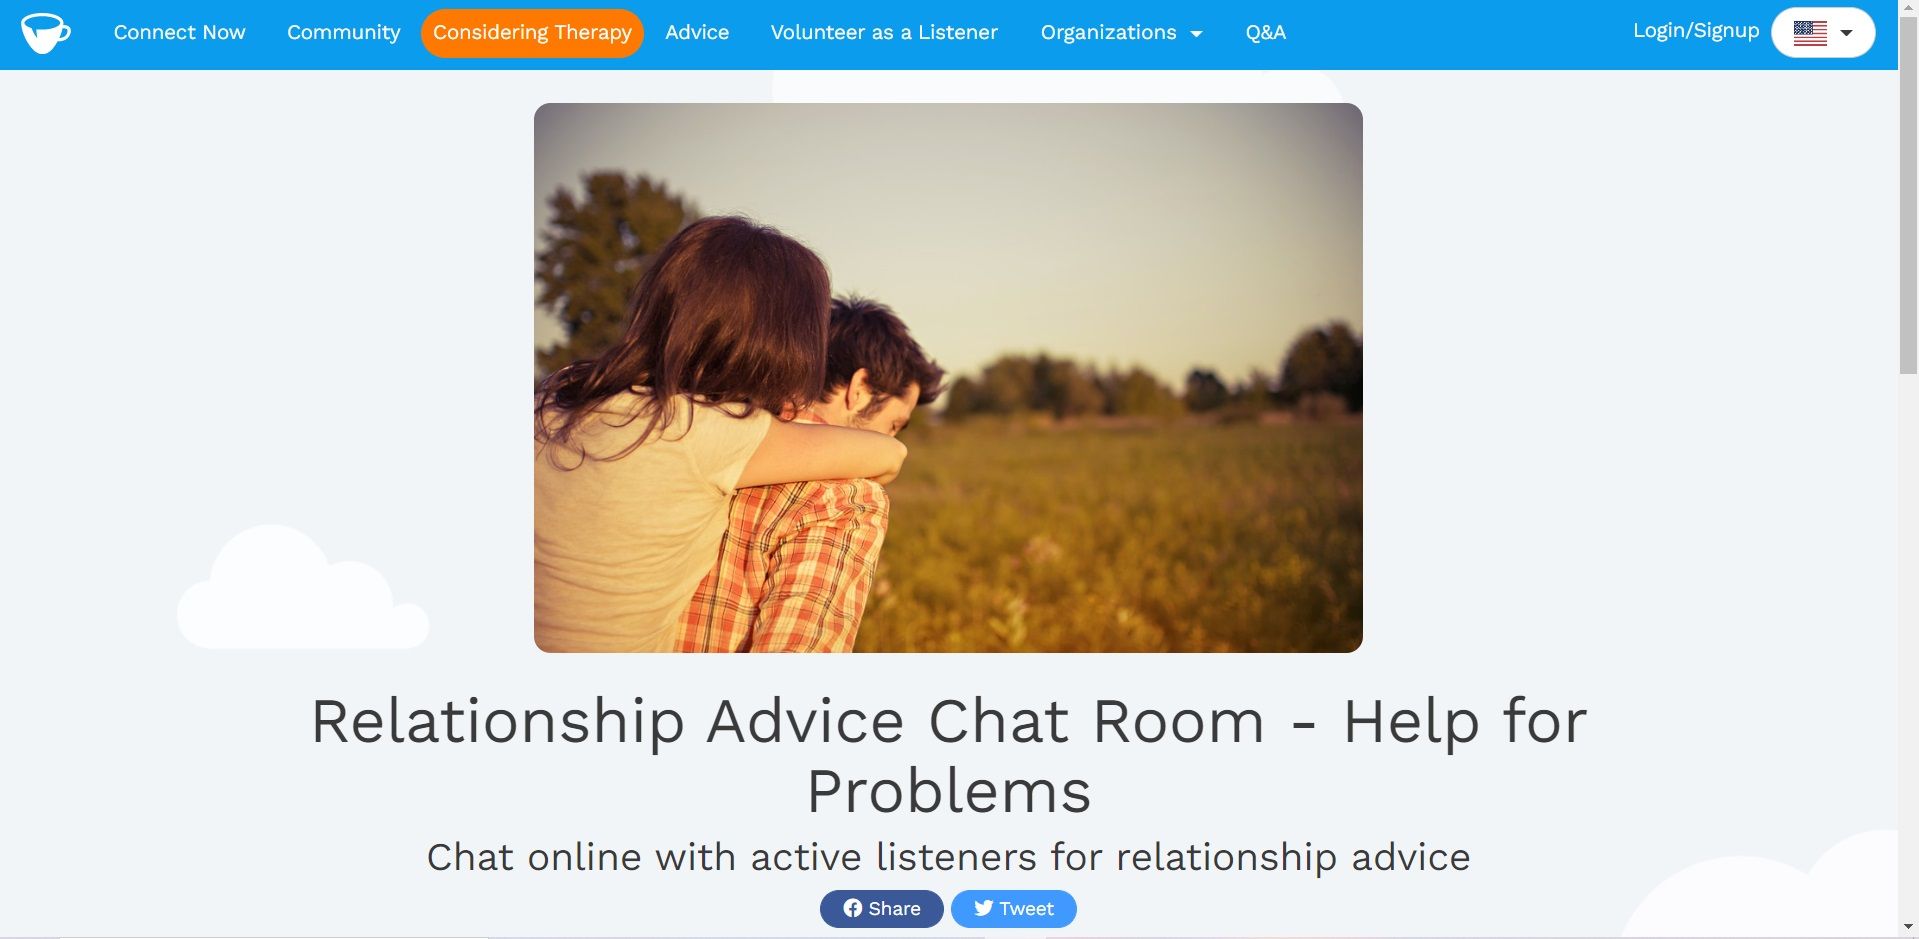 7 Cups relationship advice page